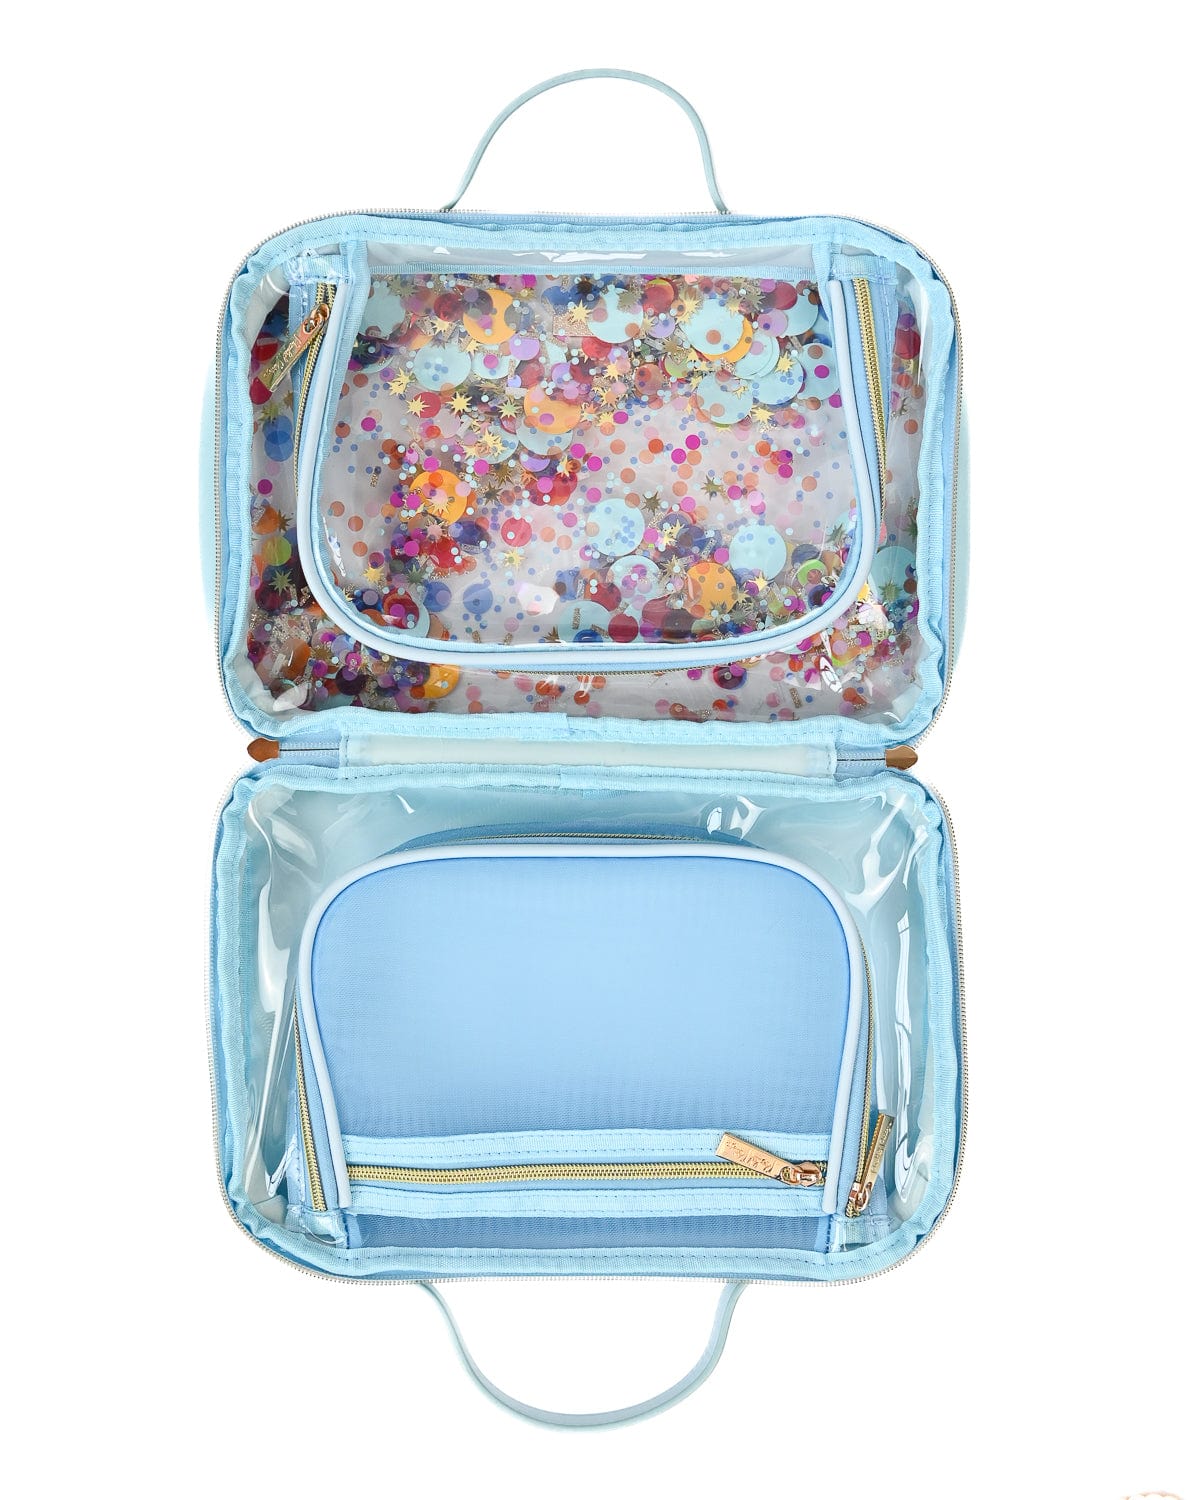 Celebrate Every Day Confetti Traveler Make-up and Cosmetic Bag